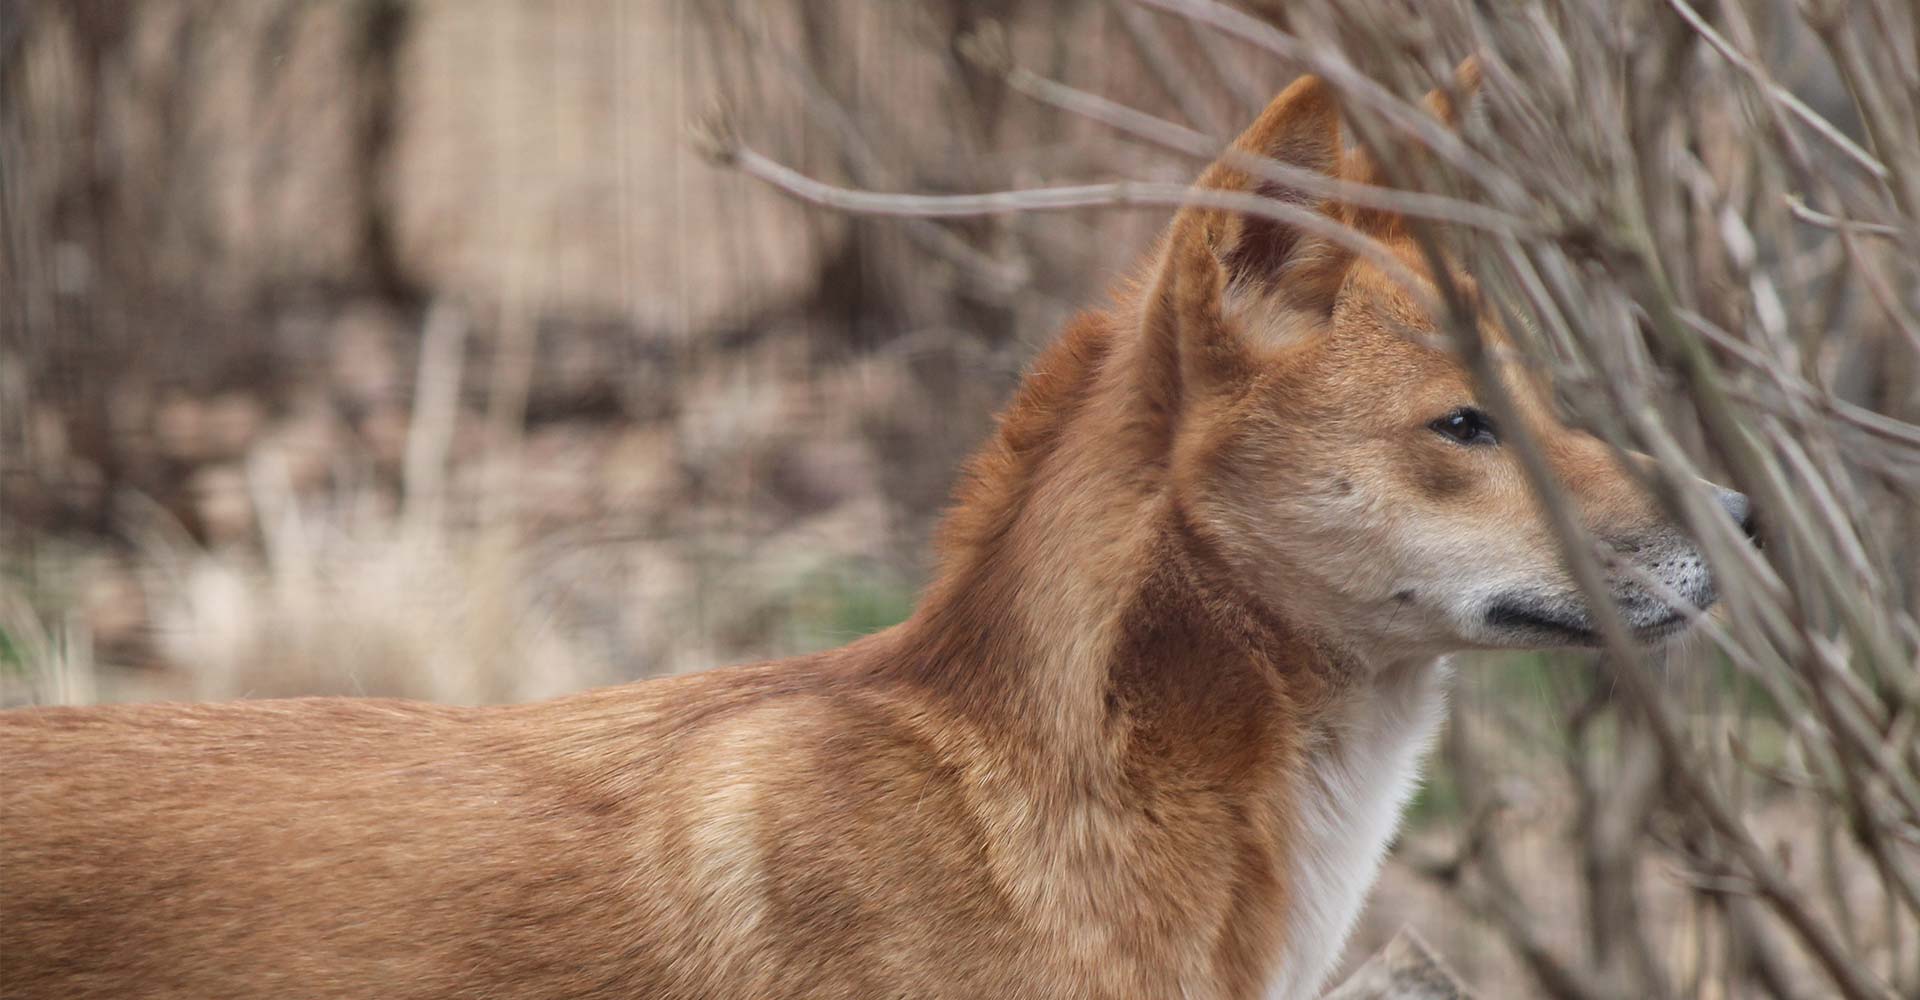 Culling Predators May Cause More Livestock Death - Conjour Conservation Editorial - Feature Image - Dingo